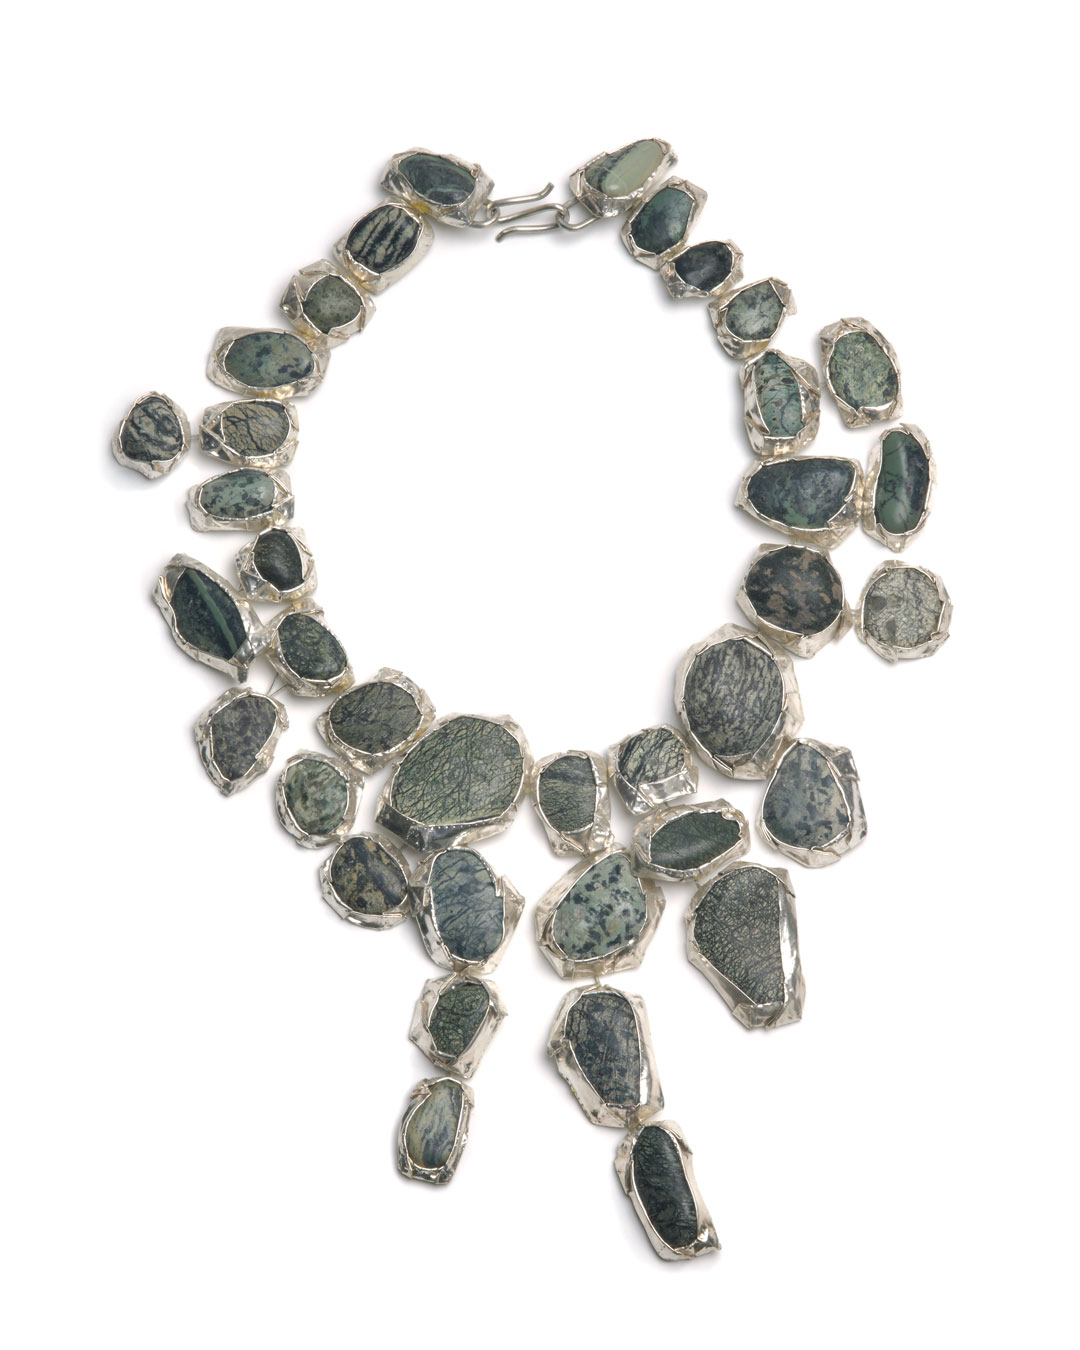 Susanna Loew, Steinreich, 2009, necklace, silver (999 and 935), steel wire, marble pebbles, 230 x 325 x 20 mm, €3300